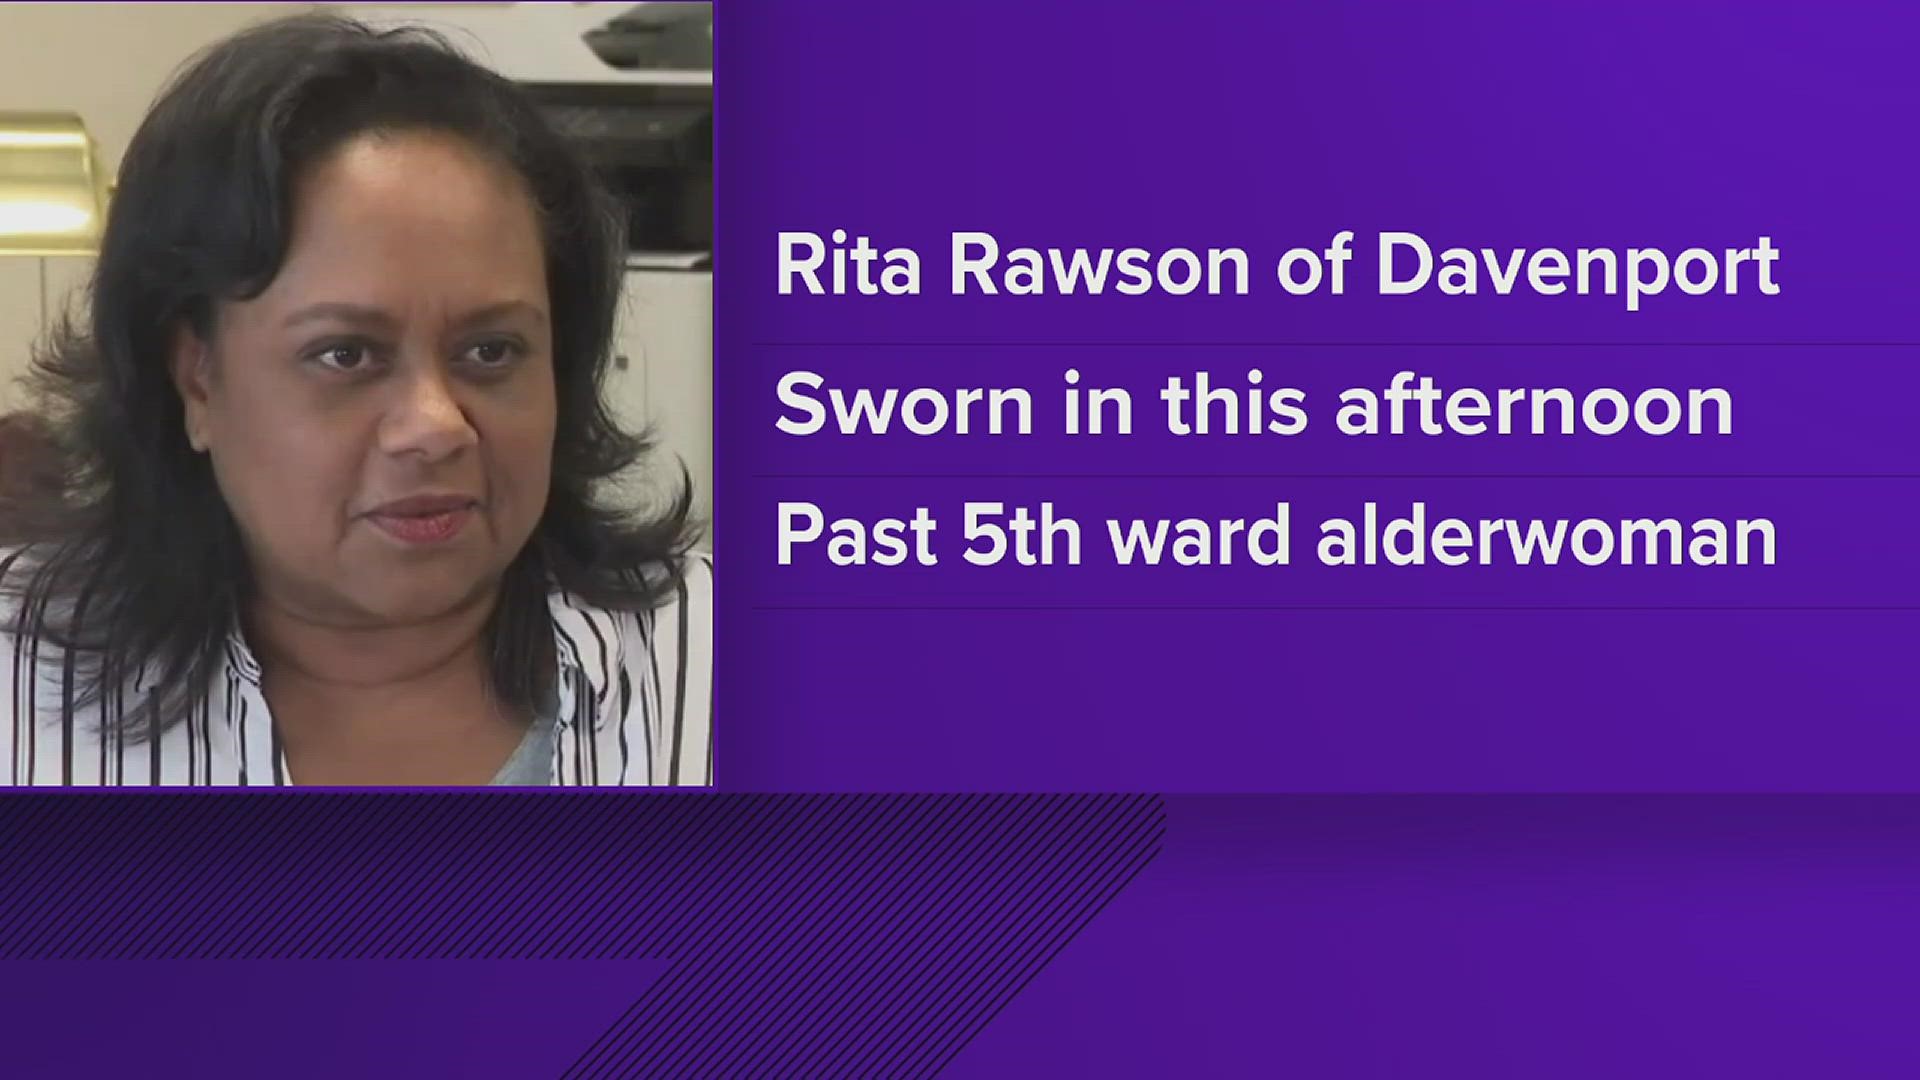 Rawson previously served on the Davenport City Council and recently retired from her financial advising practice.